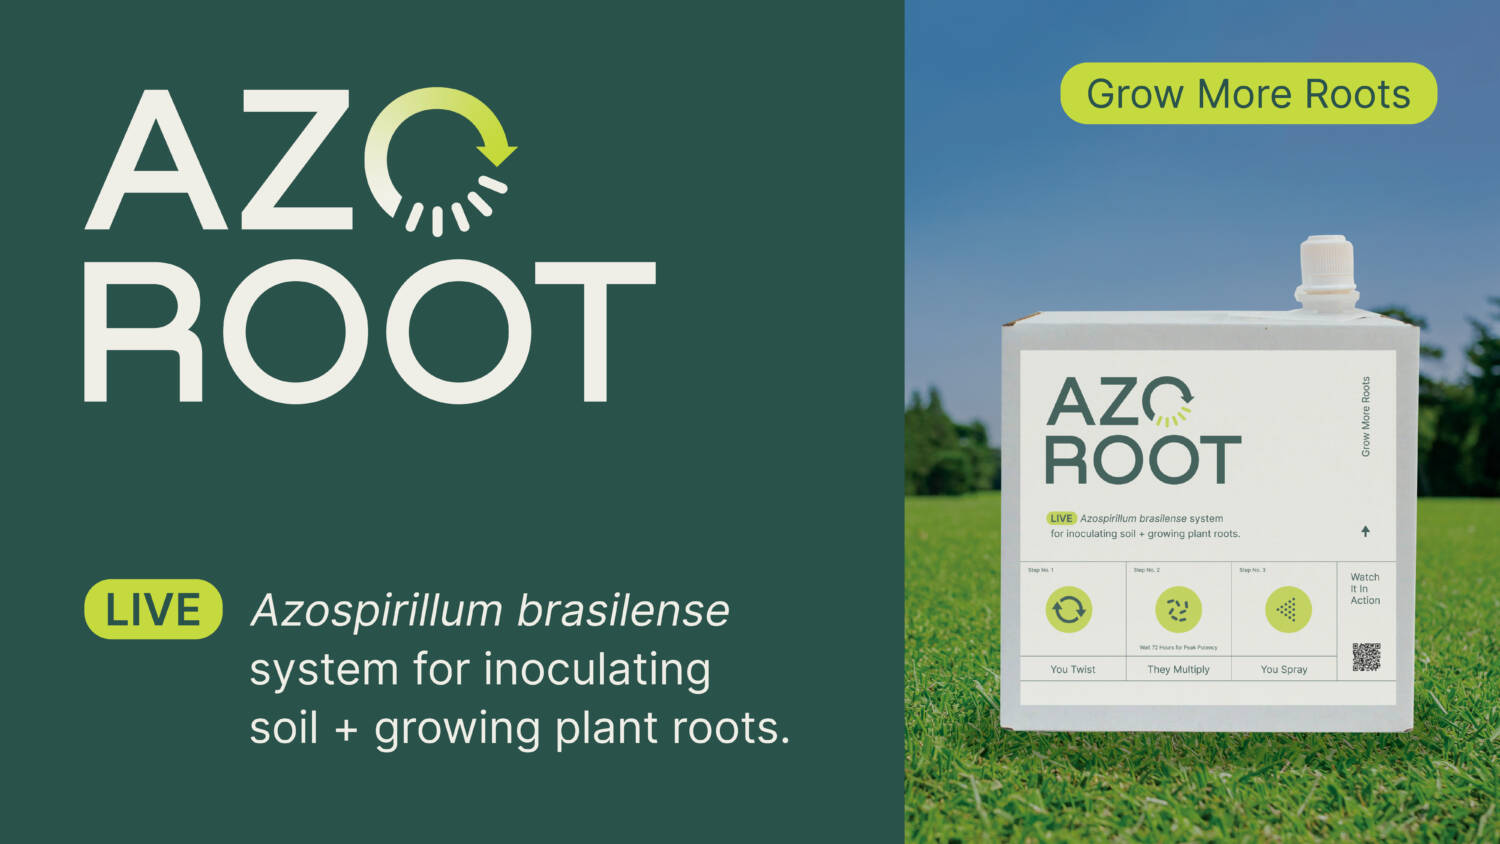 Harrell's Azo Root for better root growth